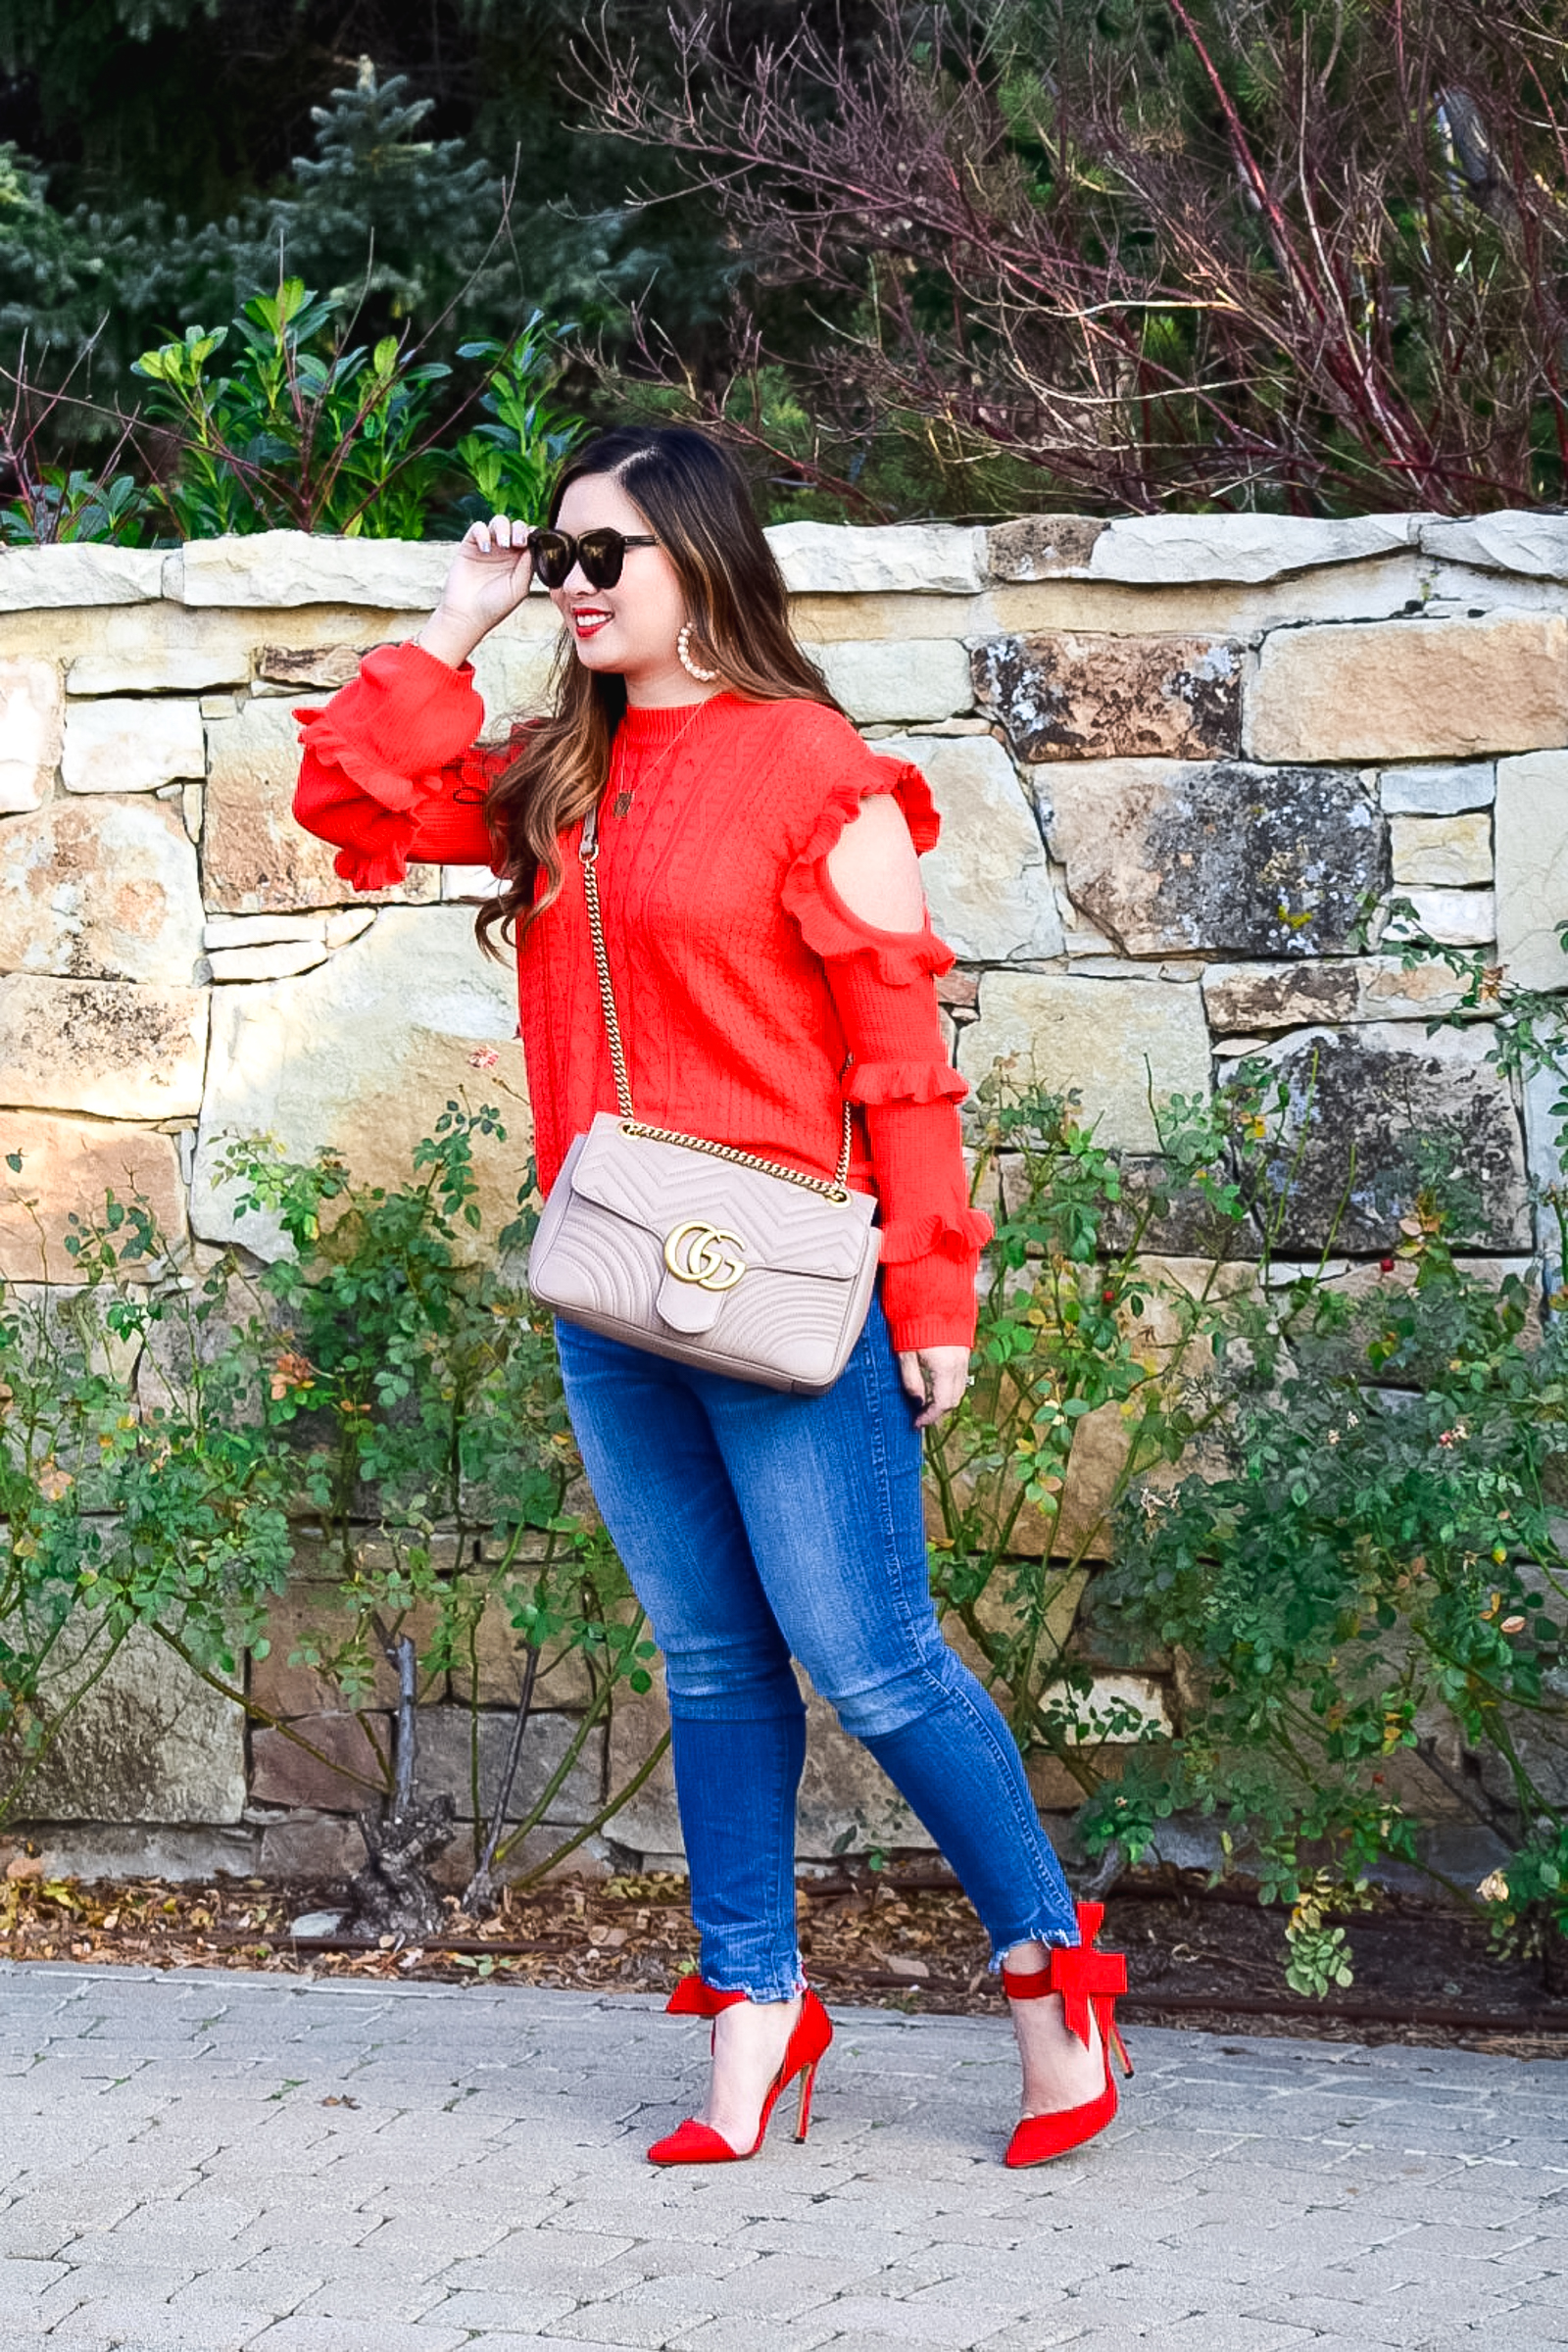 How To Score A Designer Handbag For Less On StockX by popular Utah style blogger Sandy A La Mode